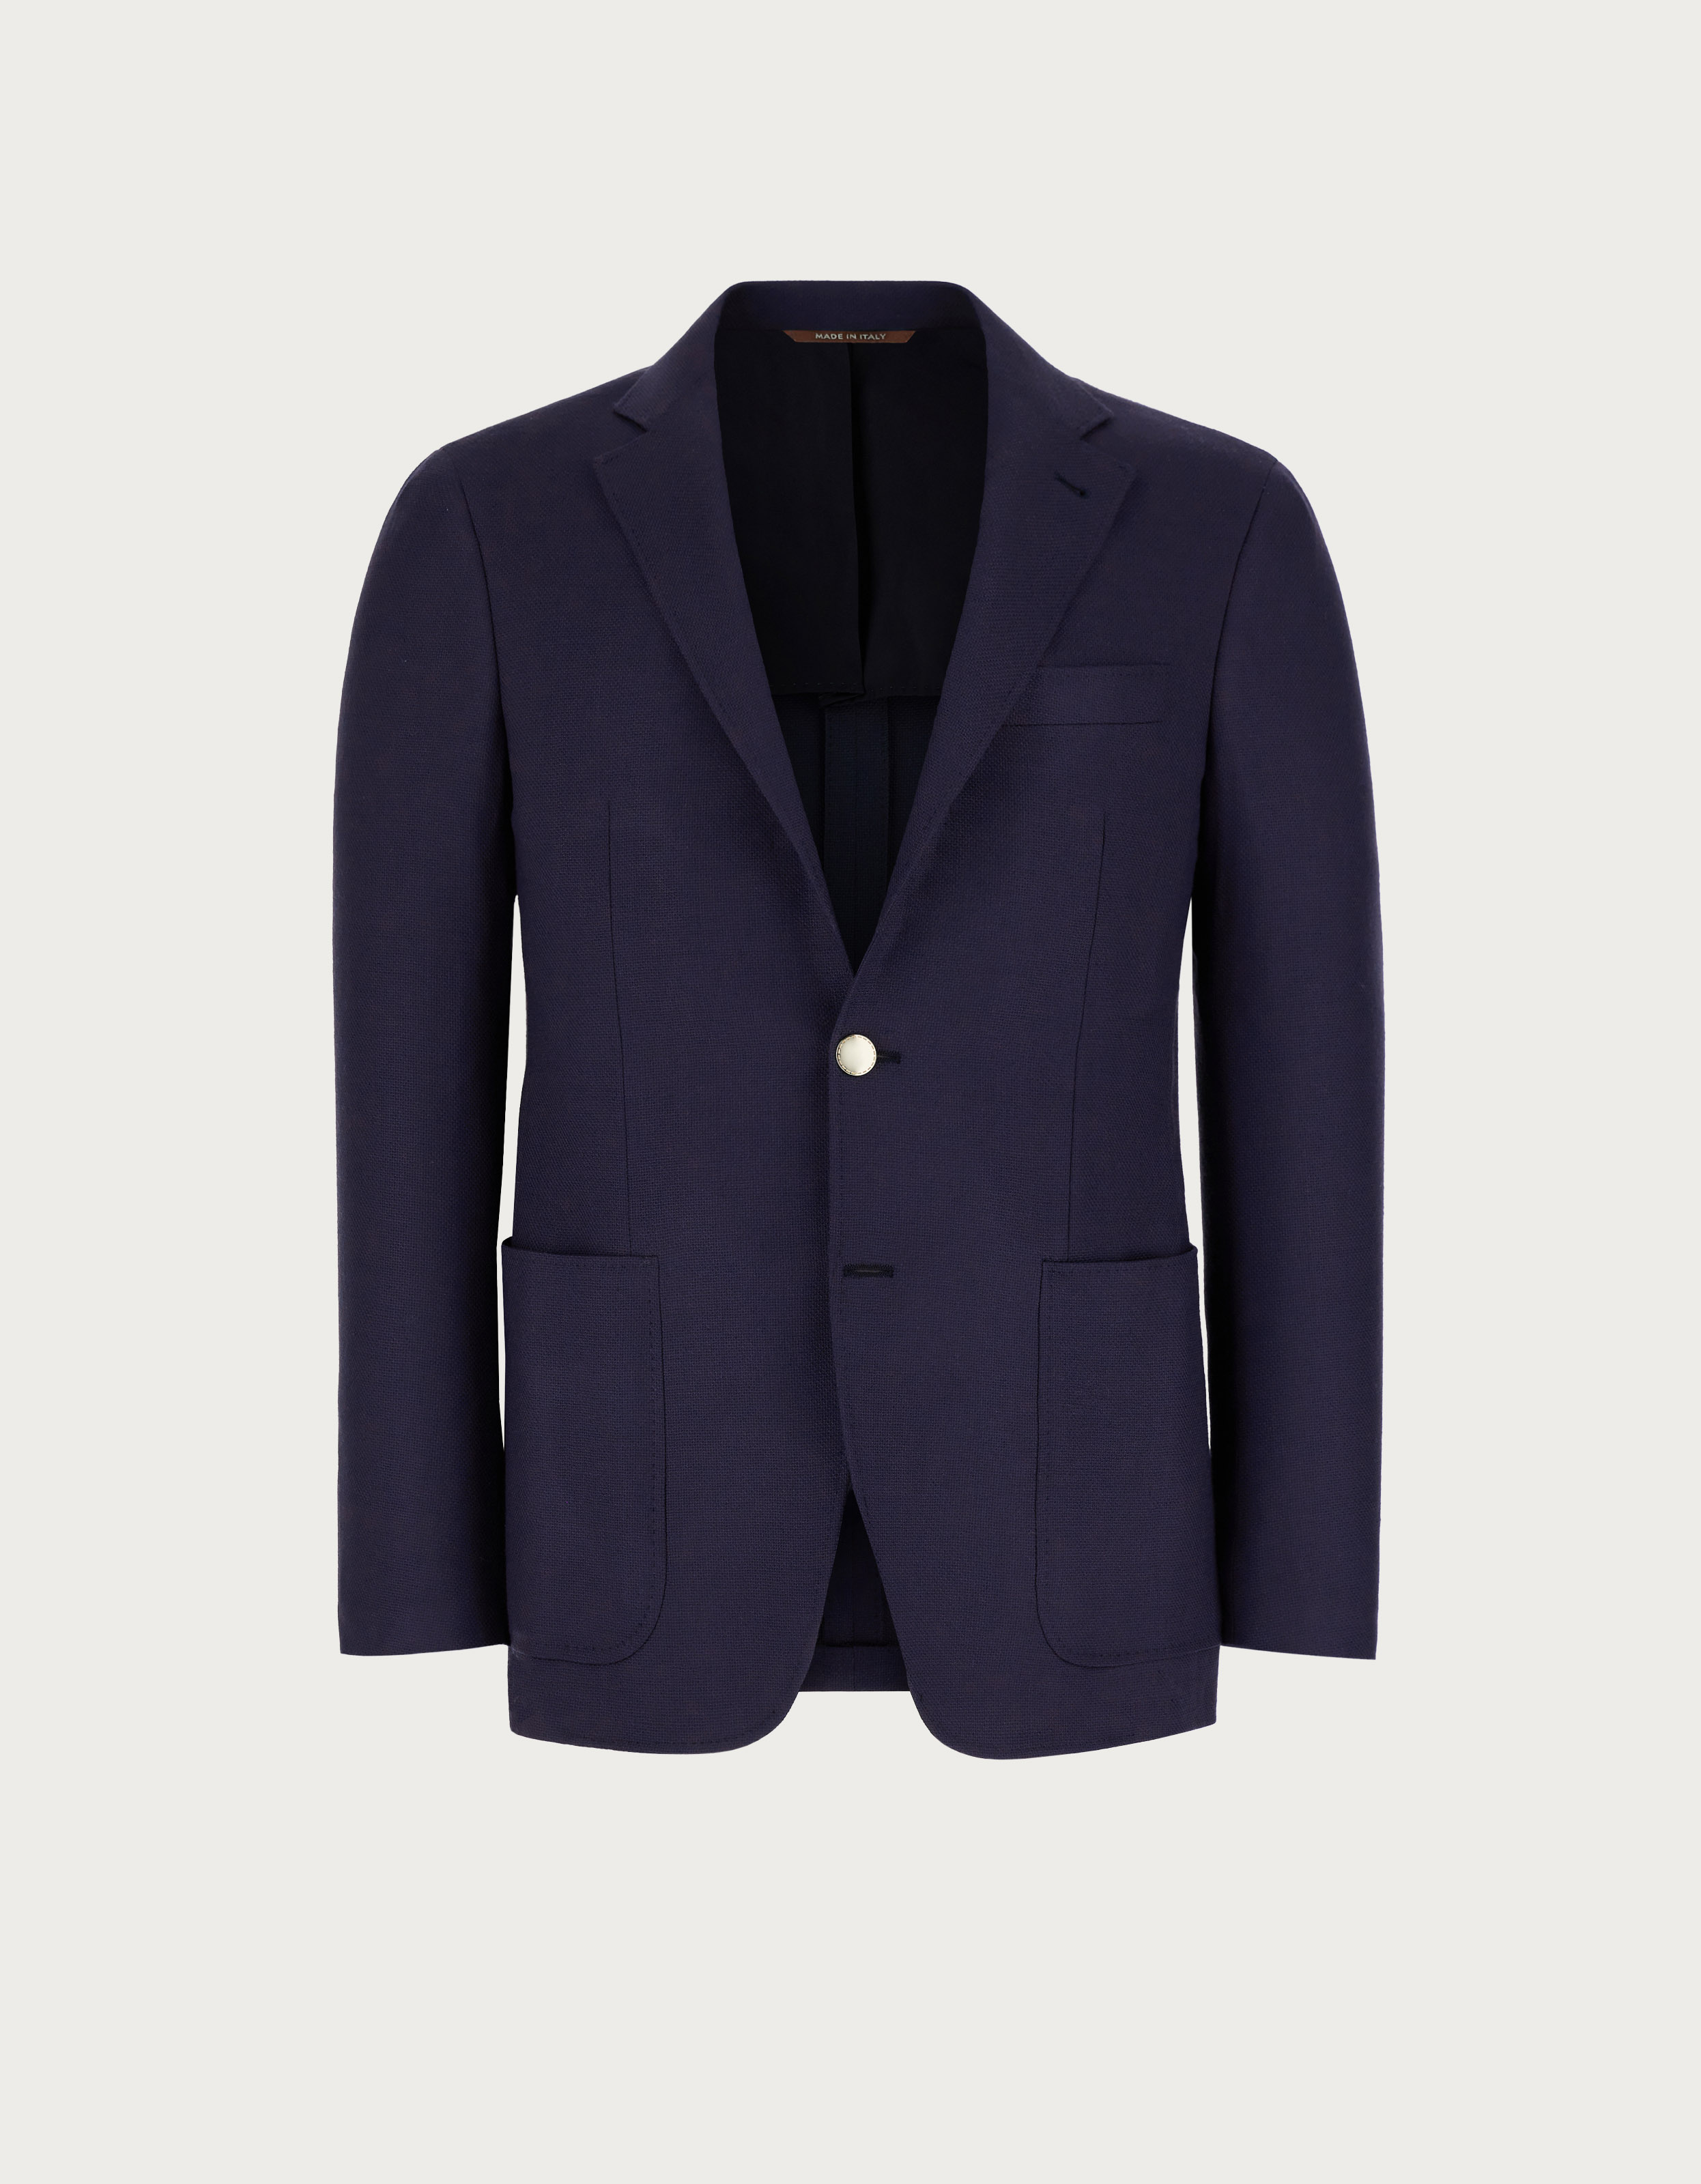 Blue Kei blazer in wool made in Italy - Canali US